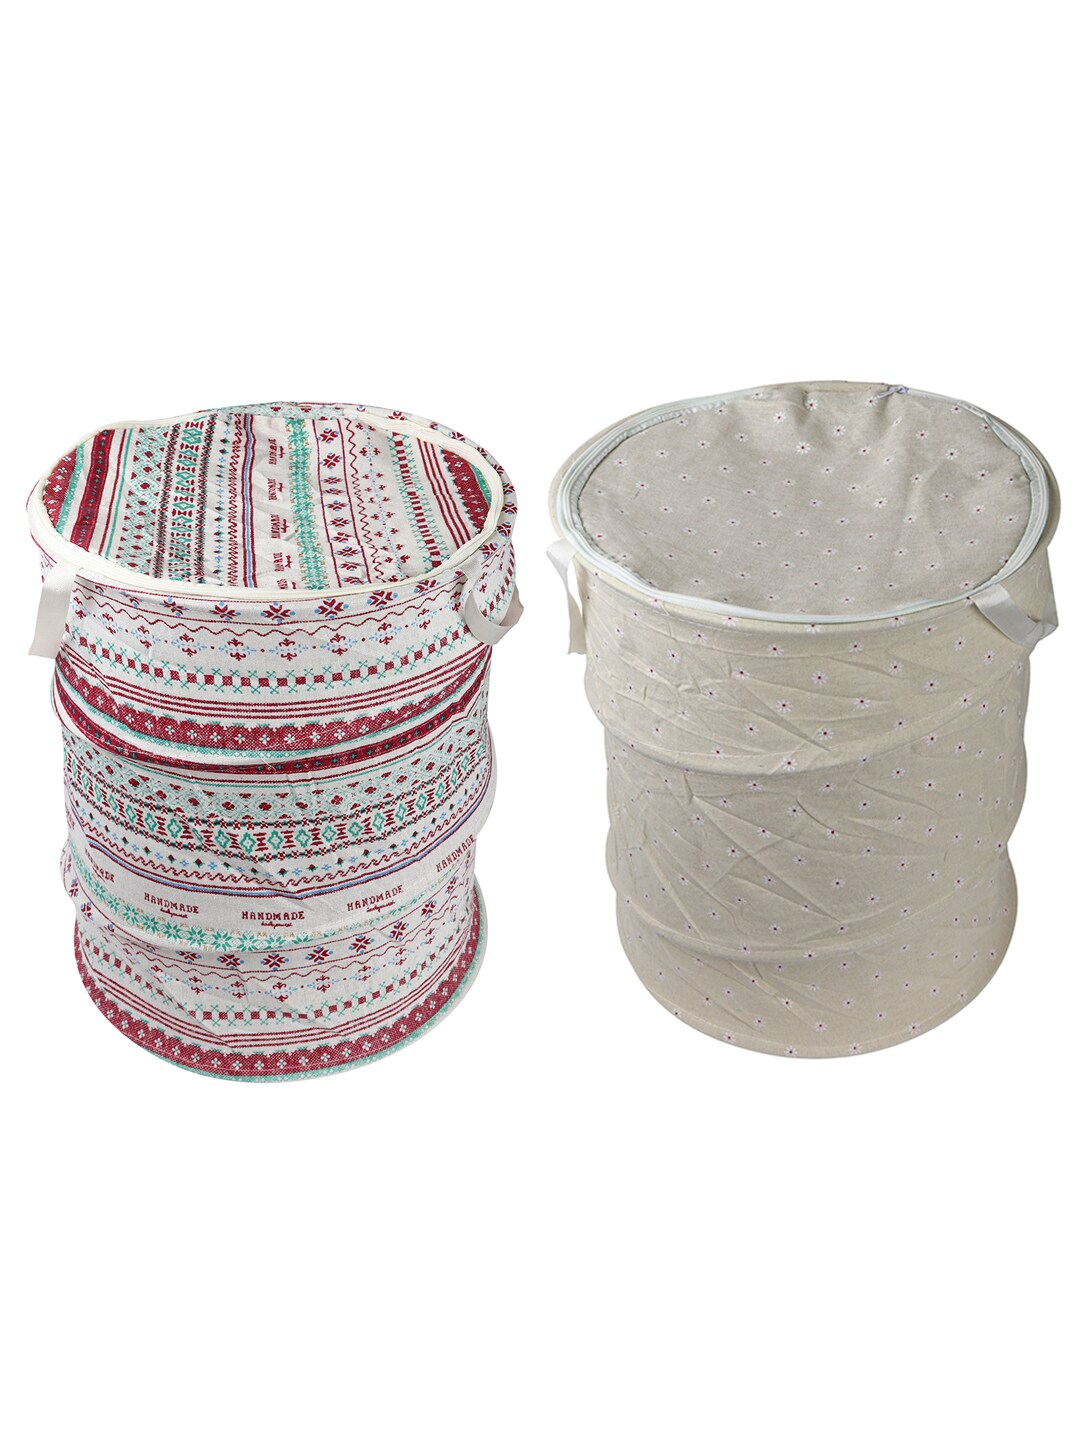 OddCroft Set Of 2 Foldable Laundry Baskets Price in India